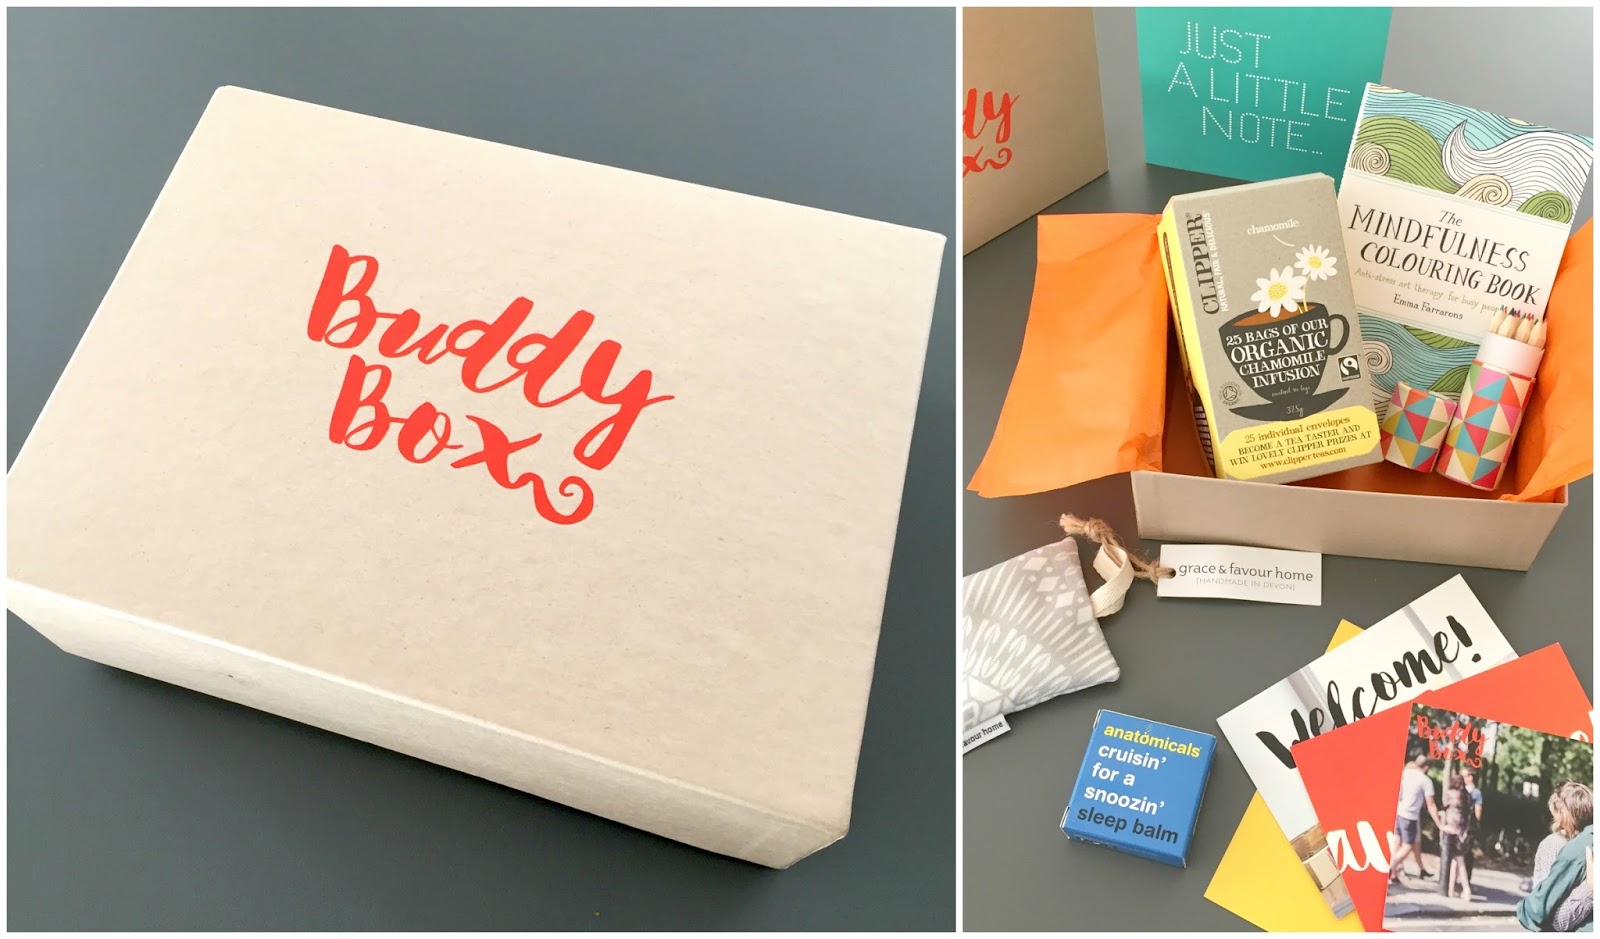 Buddy in a Box. Review box